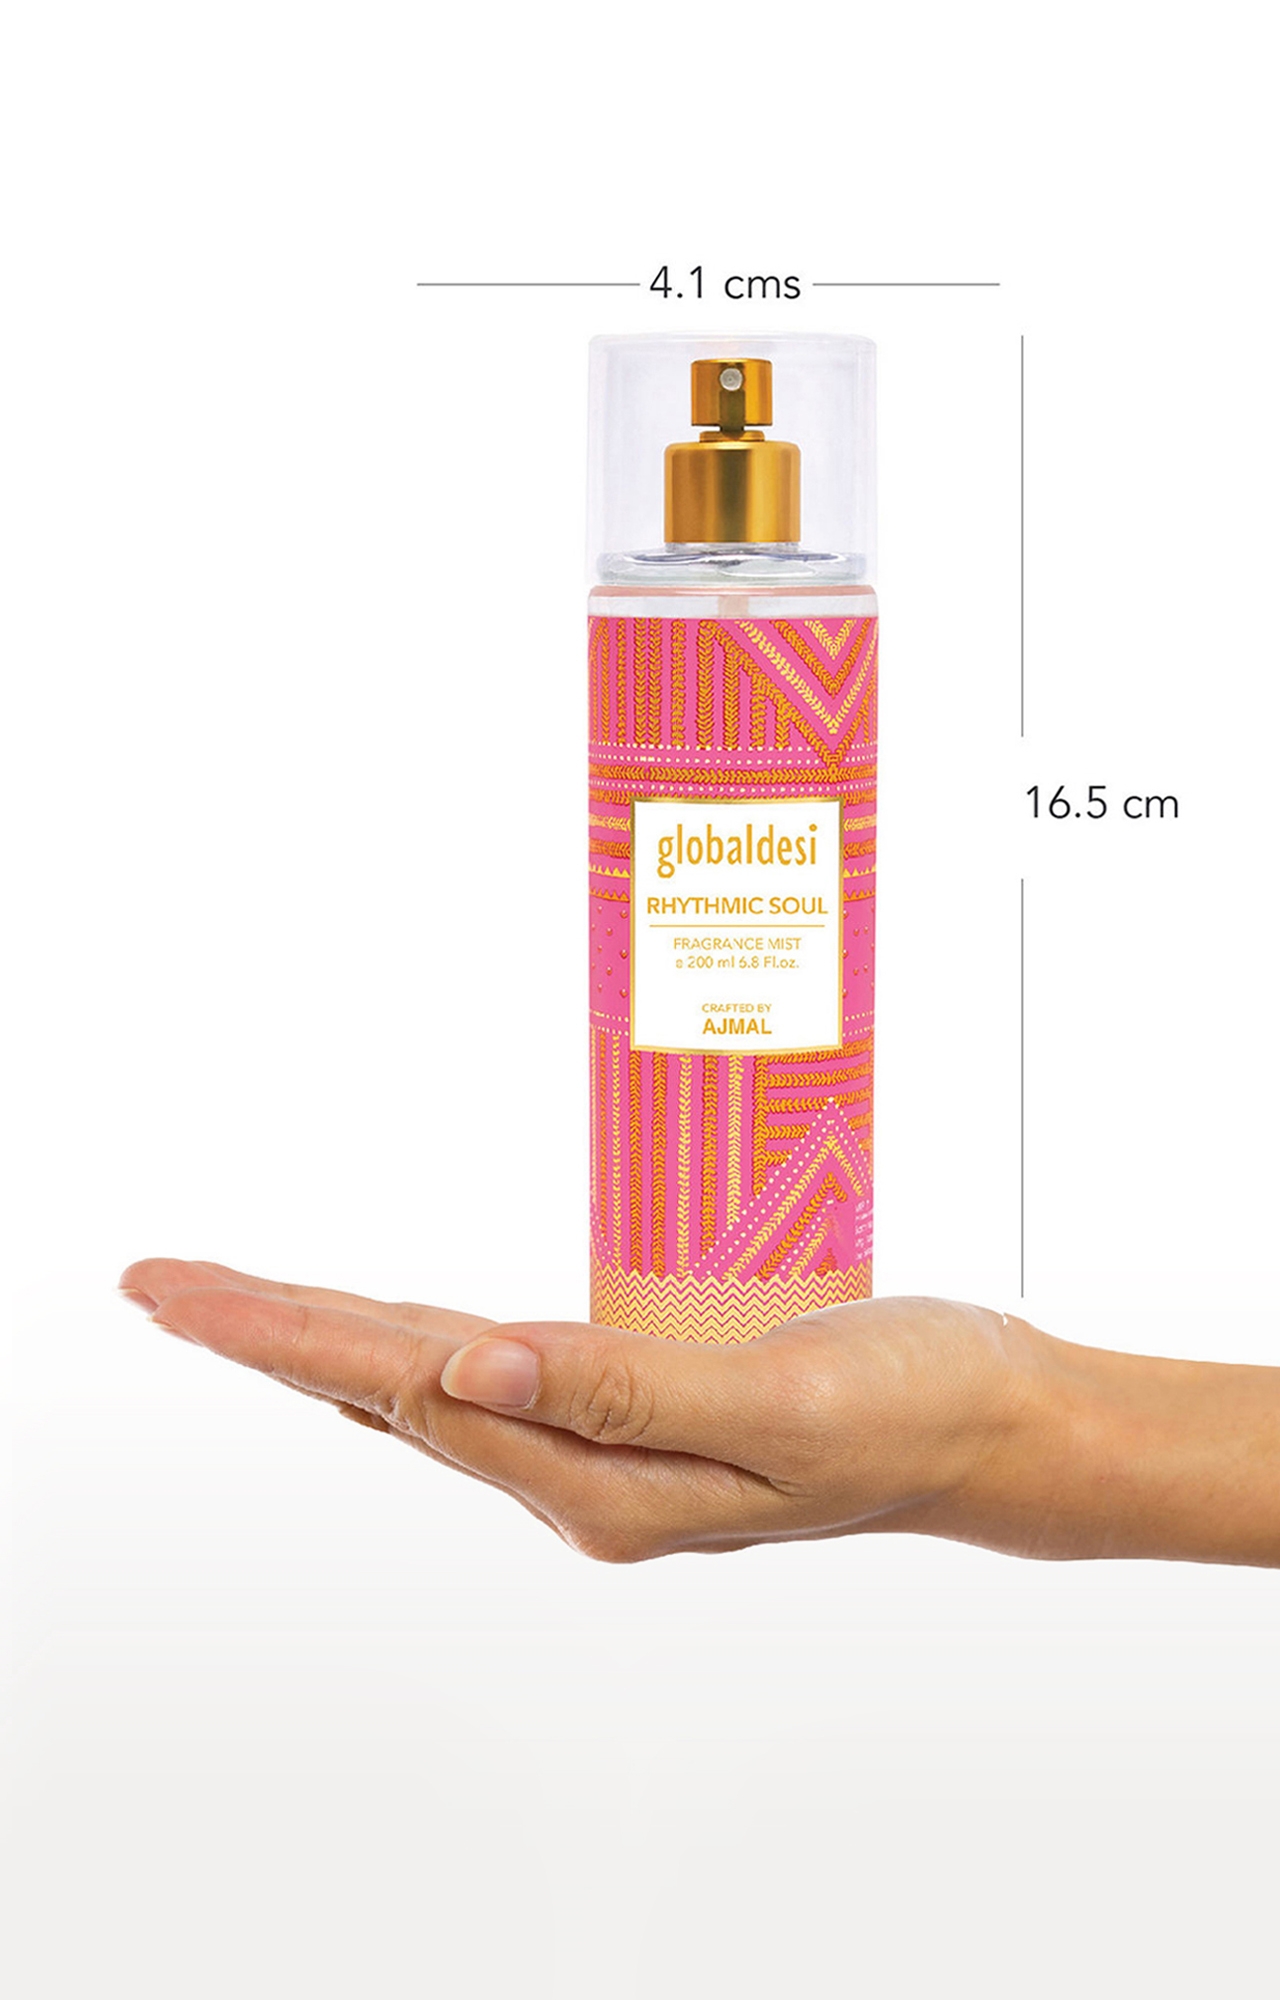 Global Desi Crafted By Ajmal | Global Desi Rhythmic Soul Body Mist Perfume 200ML Long Lasting Scent Spray Gift For Women Crafted by Ajmal  2